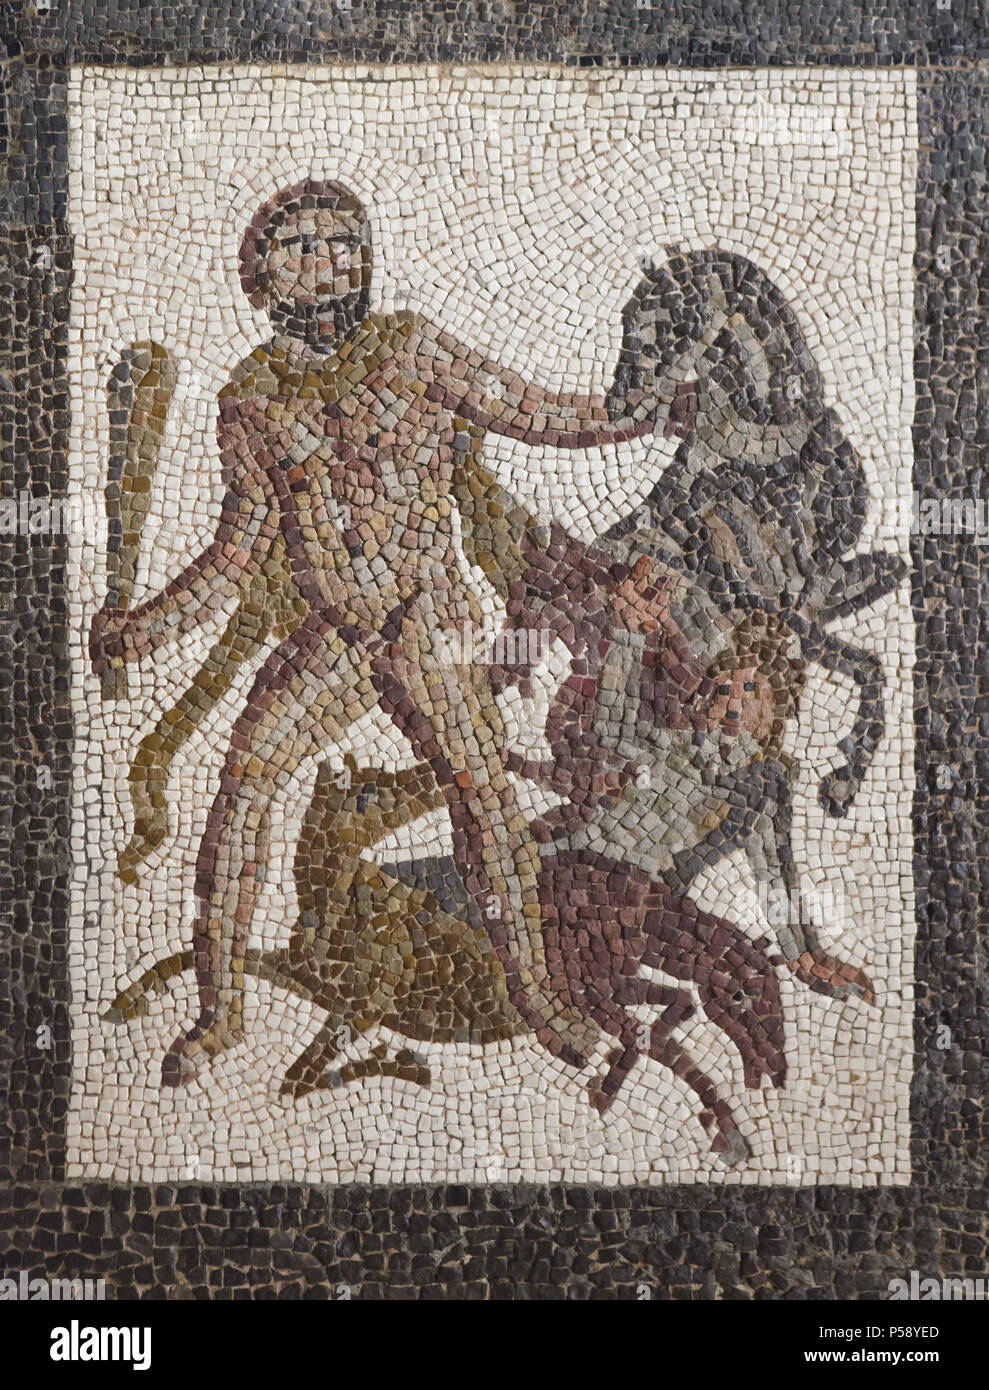 Heracles capturing the Mares of Diomedes. Labours of Heracles depicted in the Roman mosaic dated from the 3rd century AD from Llíria (Valencia Province, Spain) on display in the National Archaeological Museum (Museo Arqueológico Nacional) in Madrid, Spain. Stock Photo